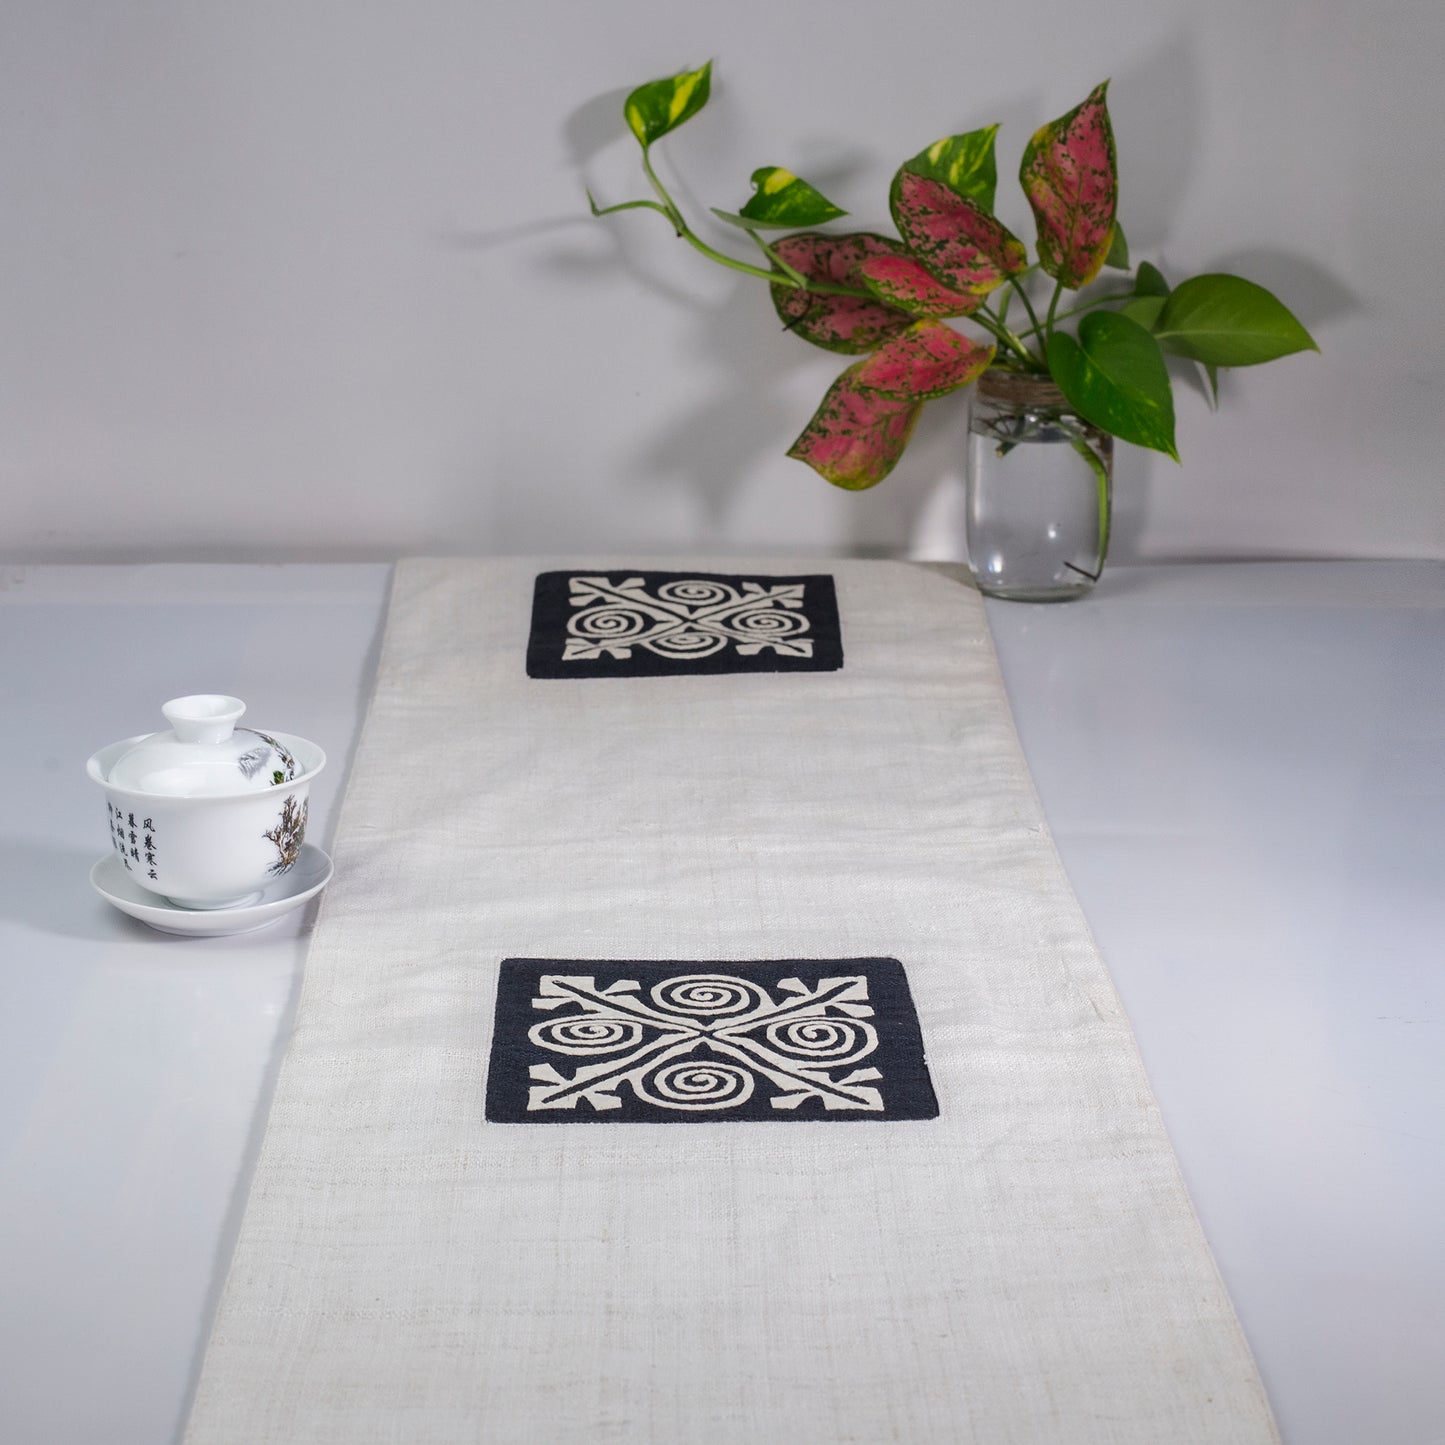 White Hemp Table Runner, white patch on black background, spiral patches in pink and black at two ends